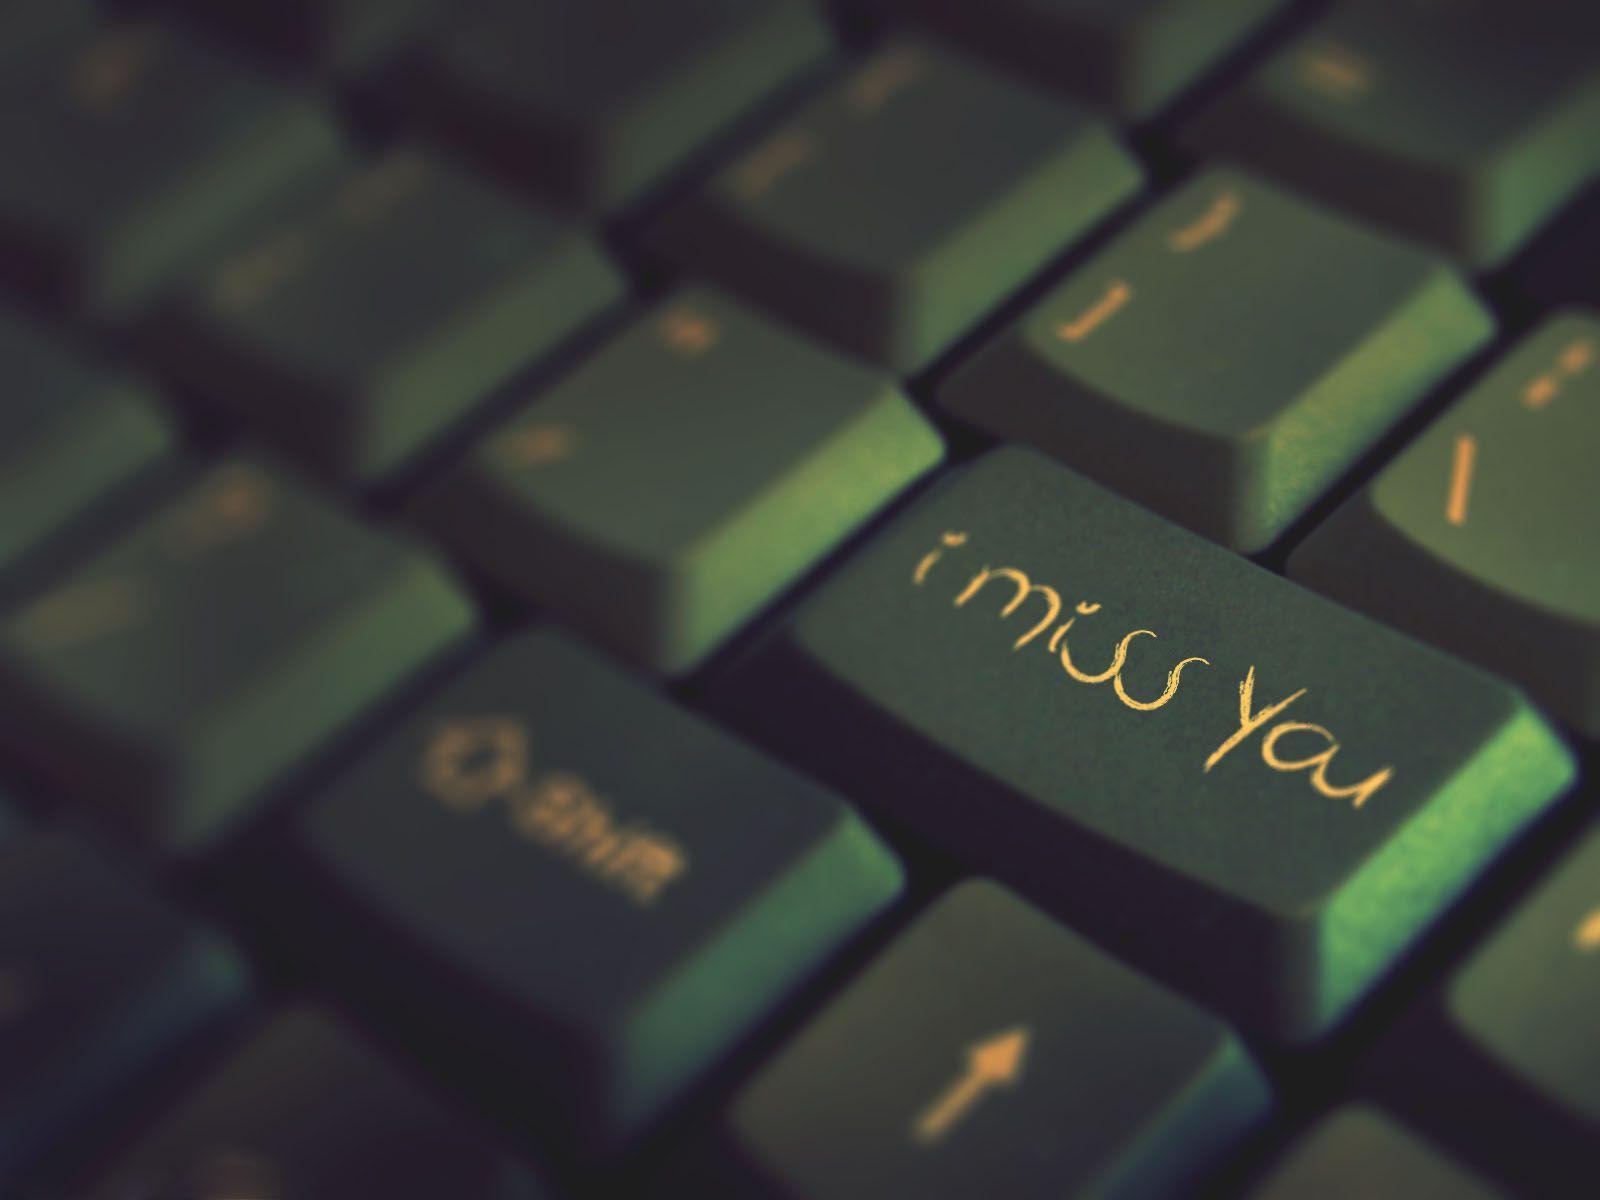 Miss You Wallpaper 1600x1200 px